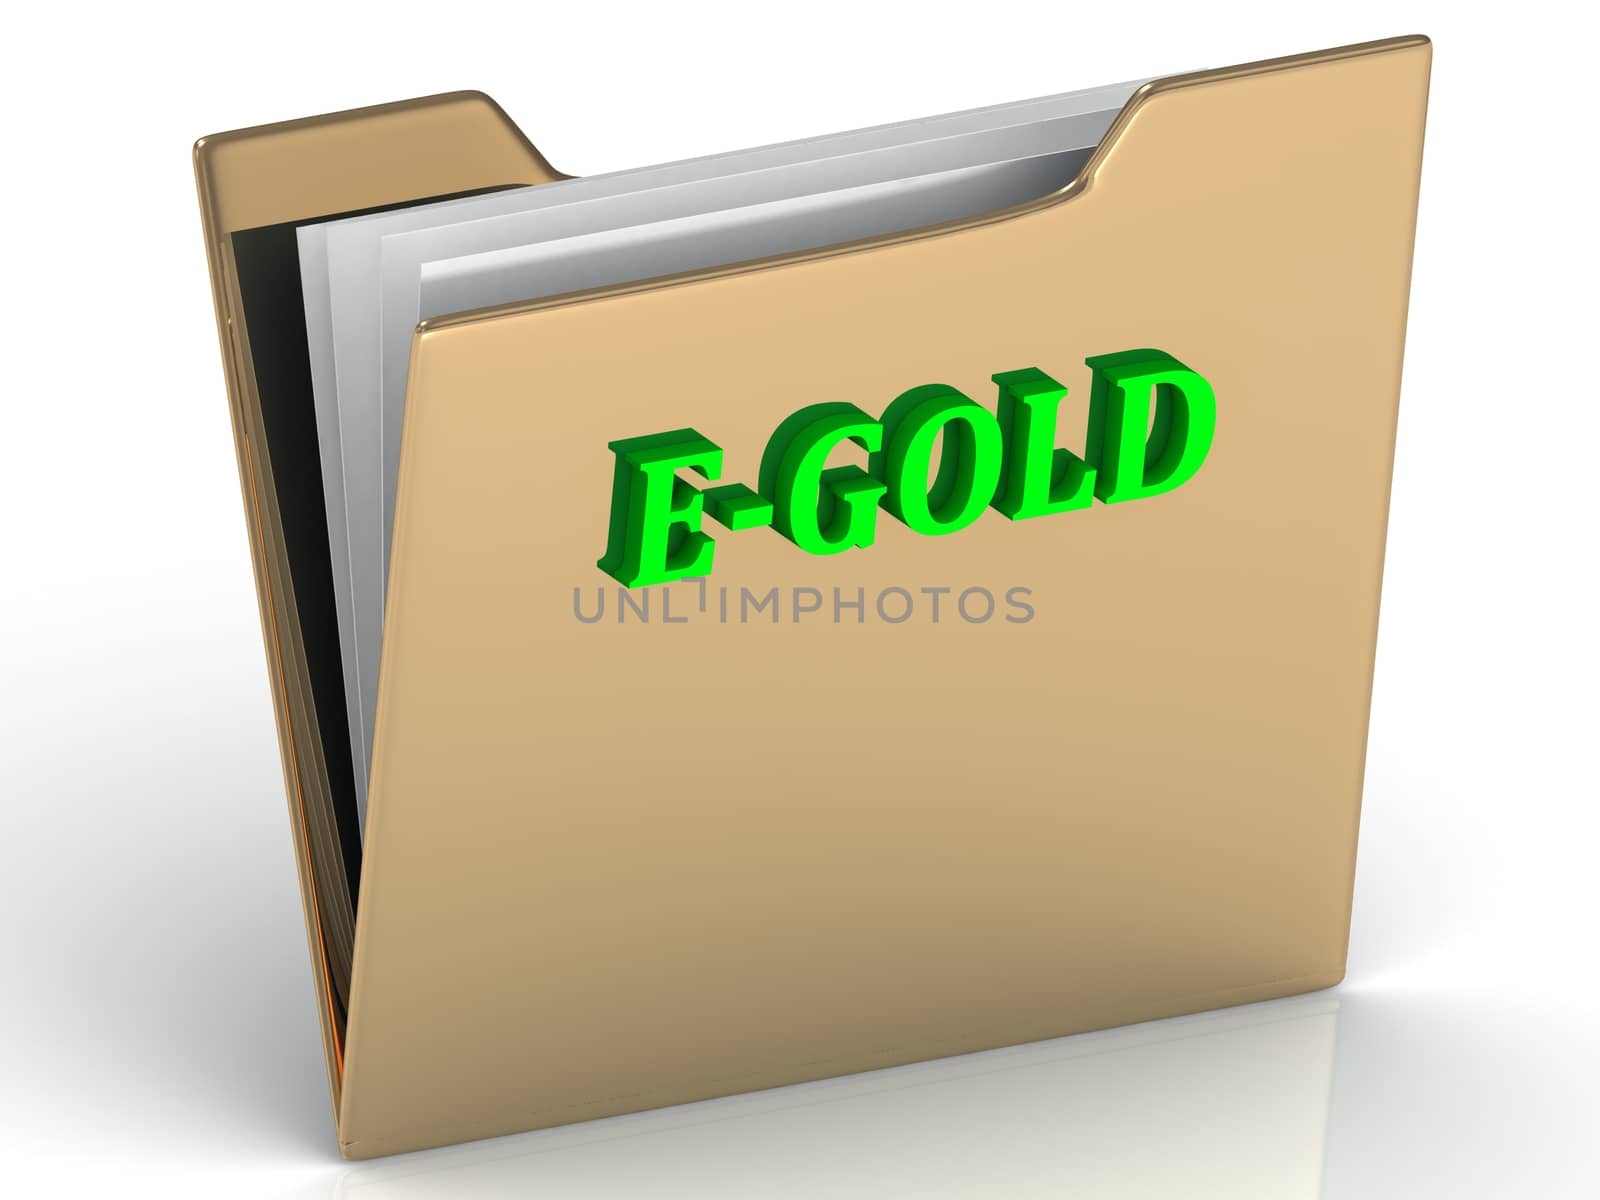 E-GOLD- bright color letters on a gold folder on a white background